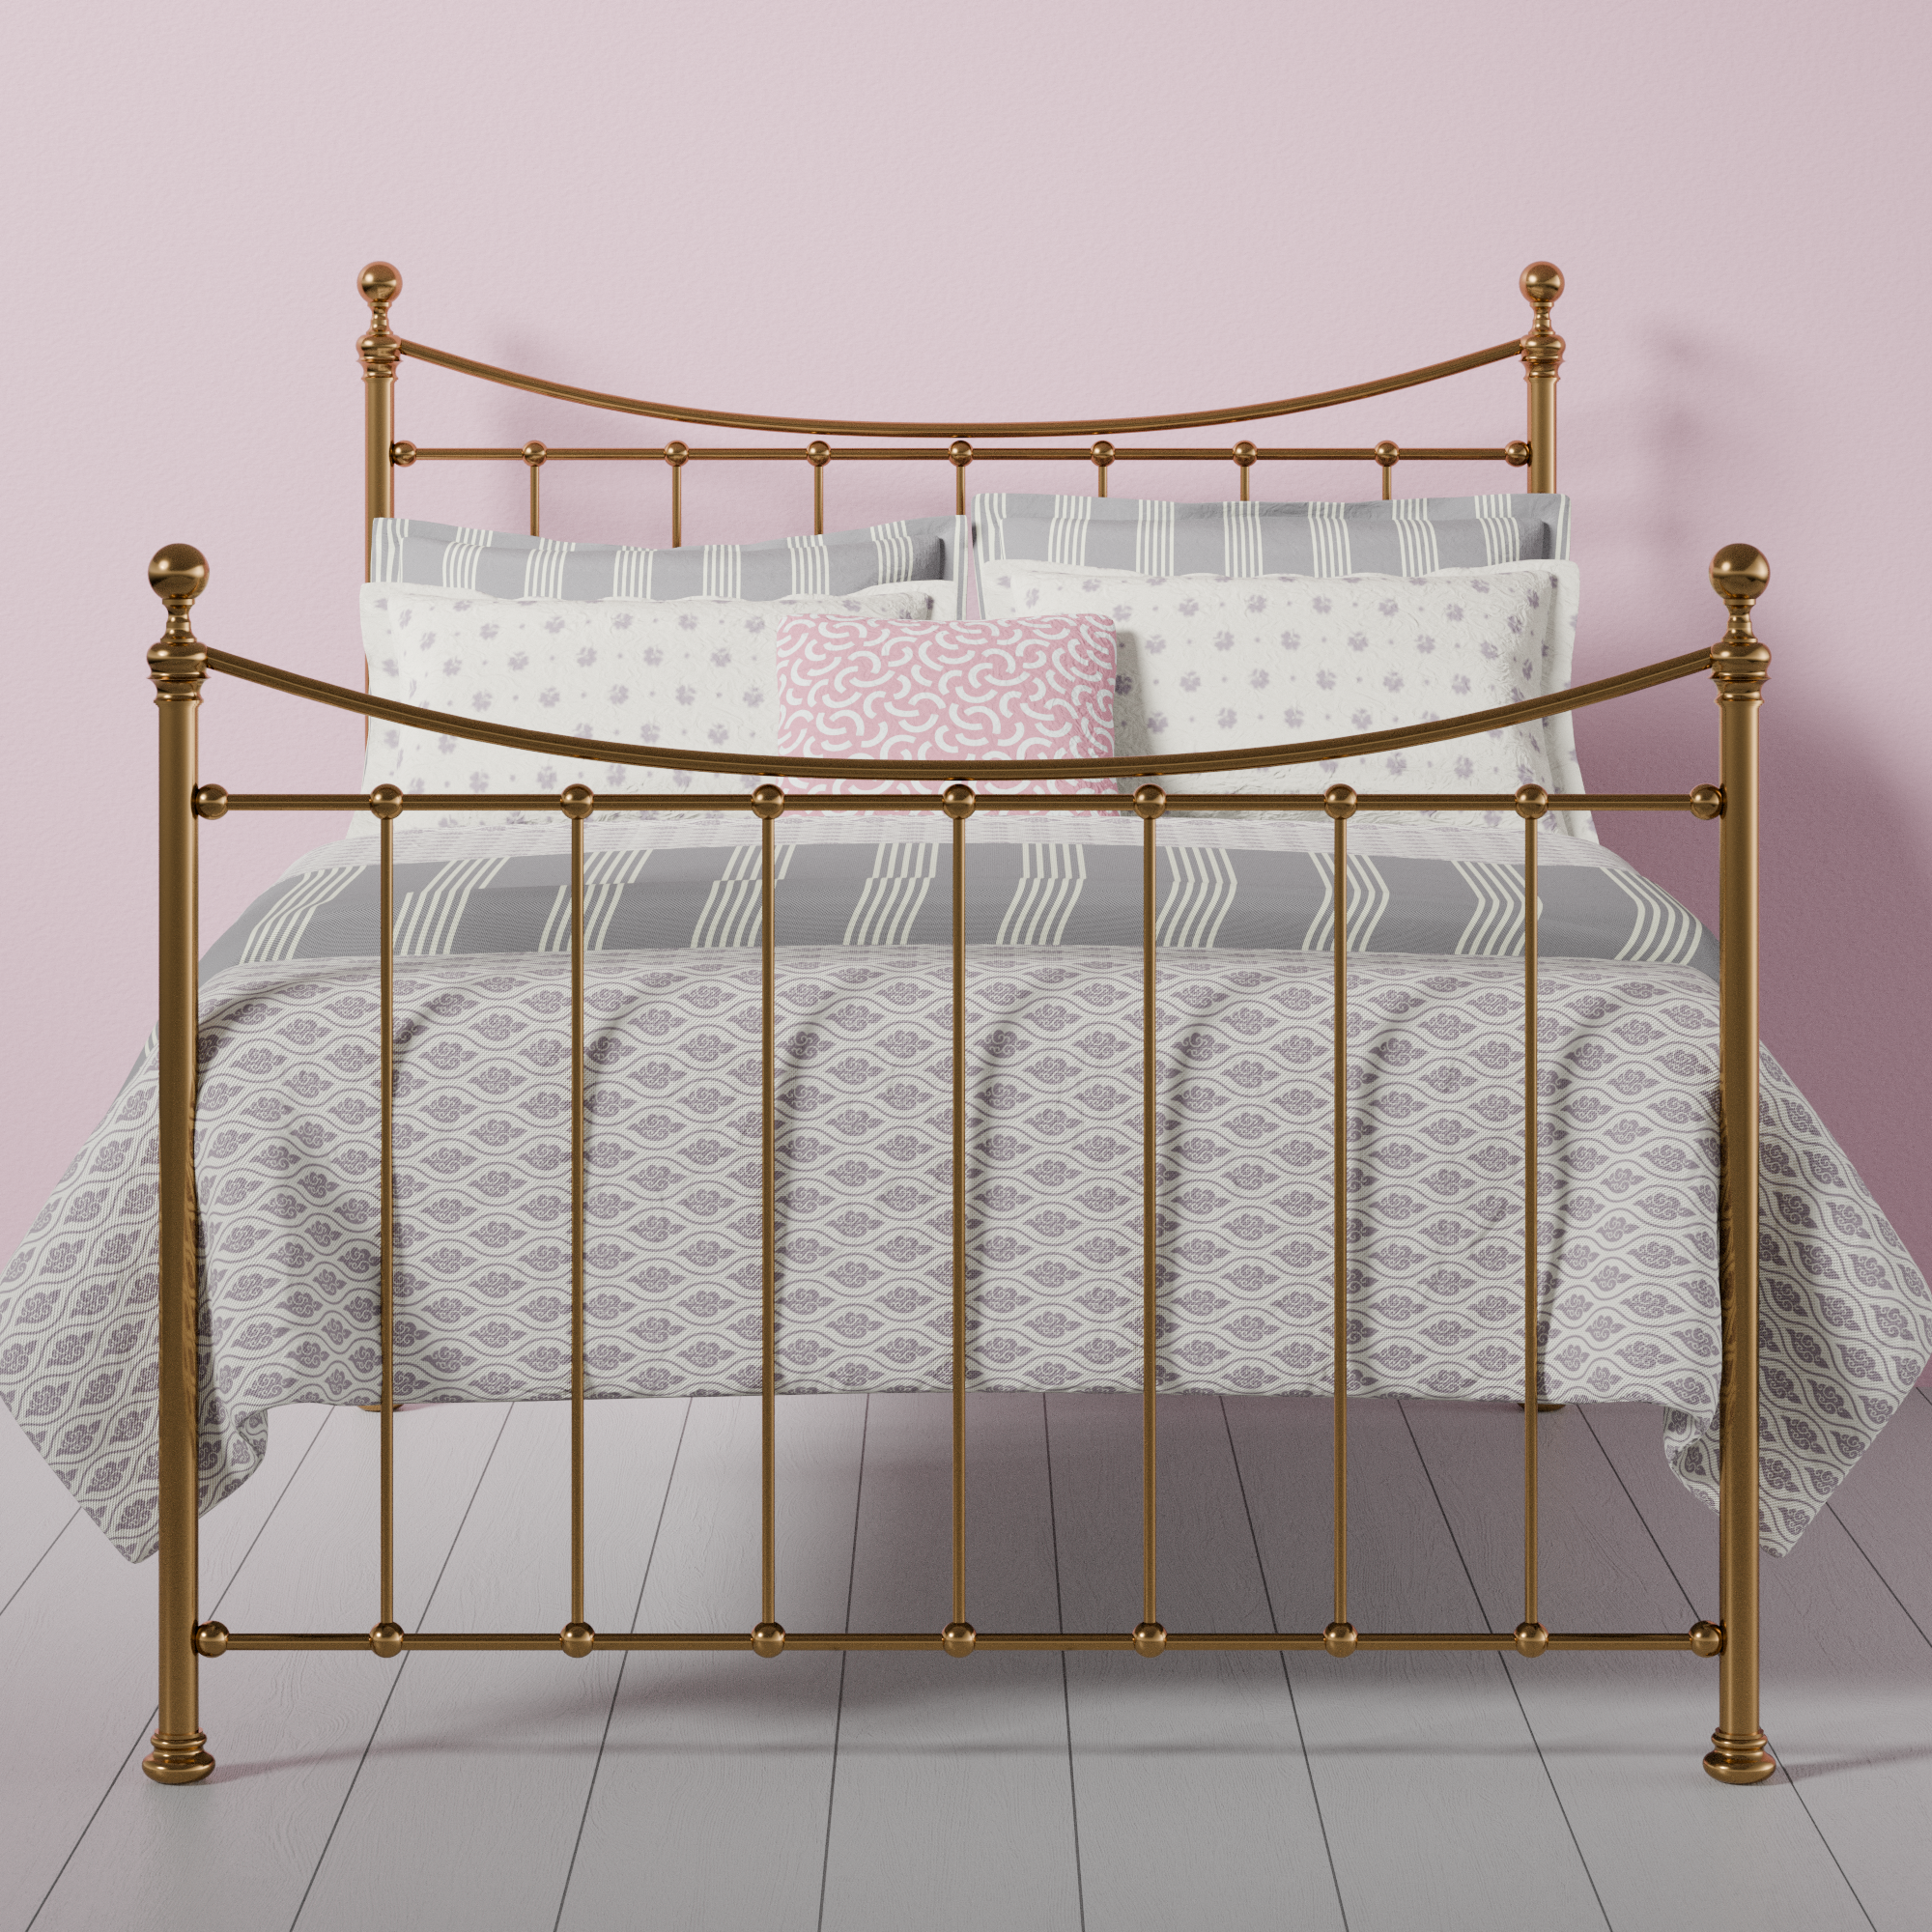 https://www.obc-uk.net/static/images/beds/brass/kendal-brass-bed-icon-set.webp